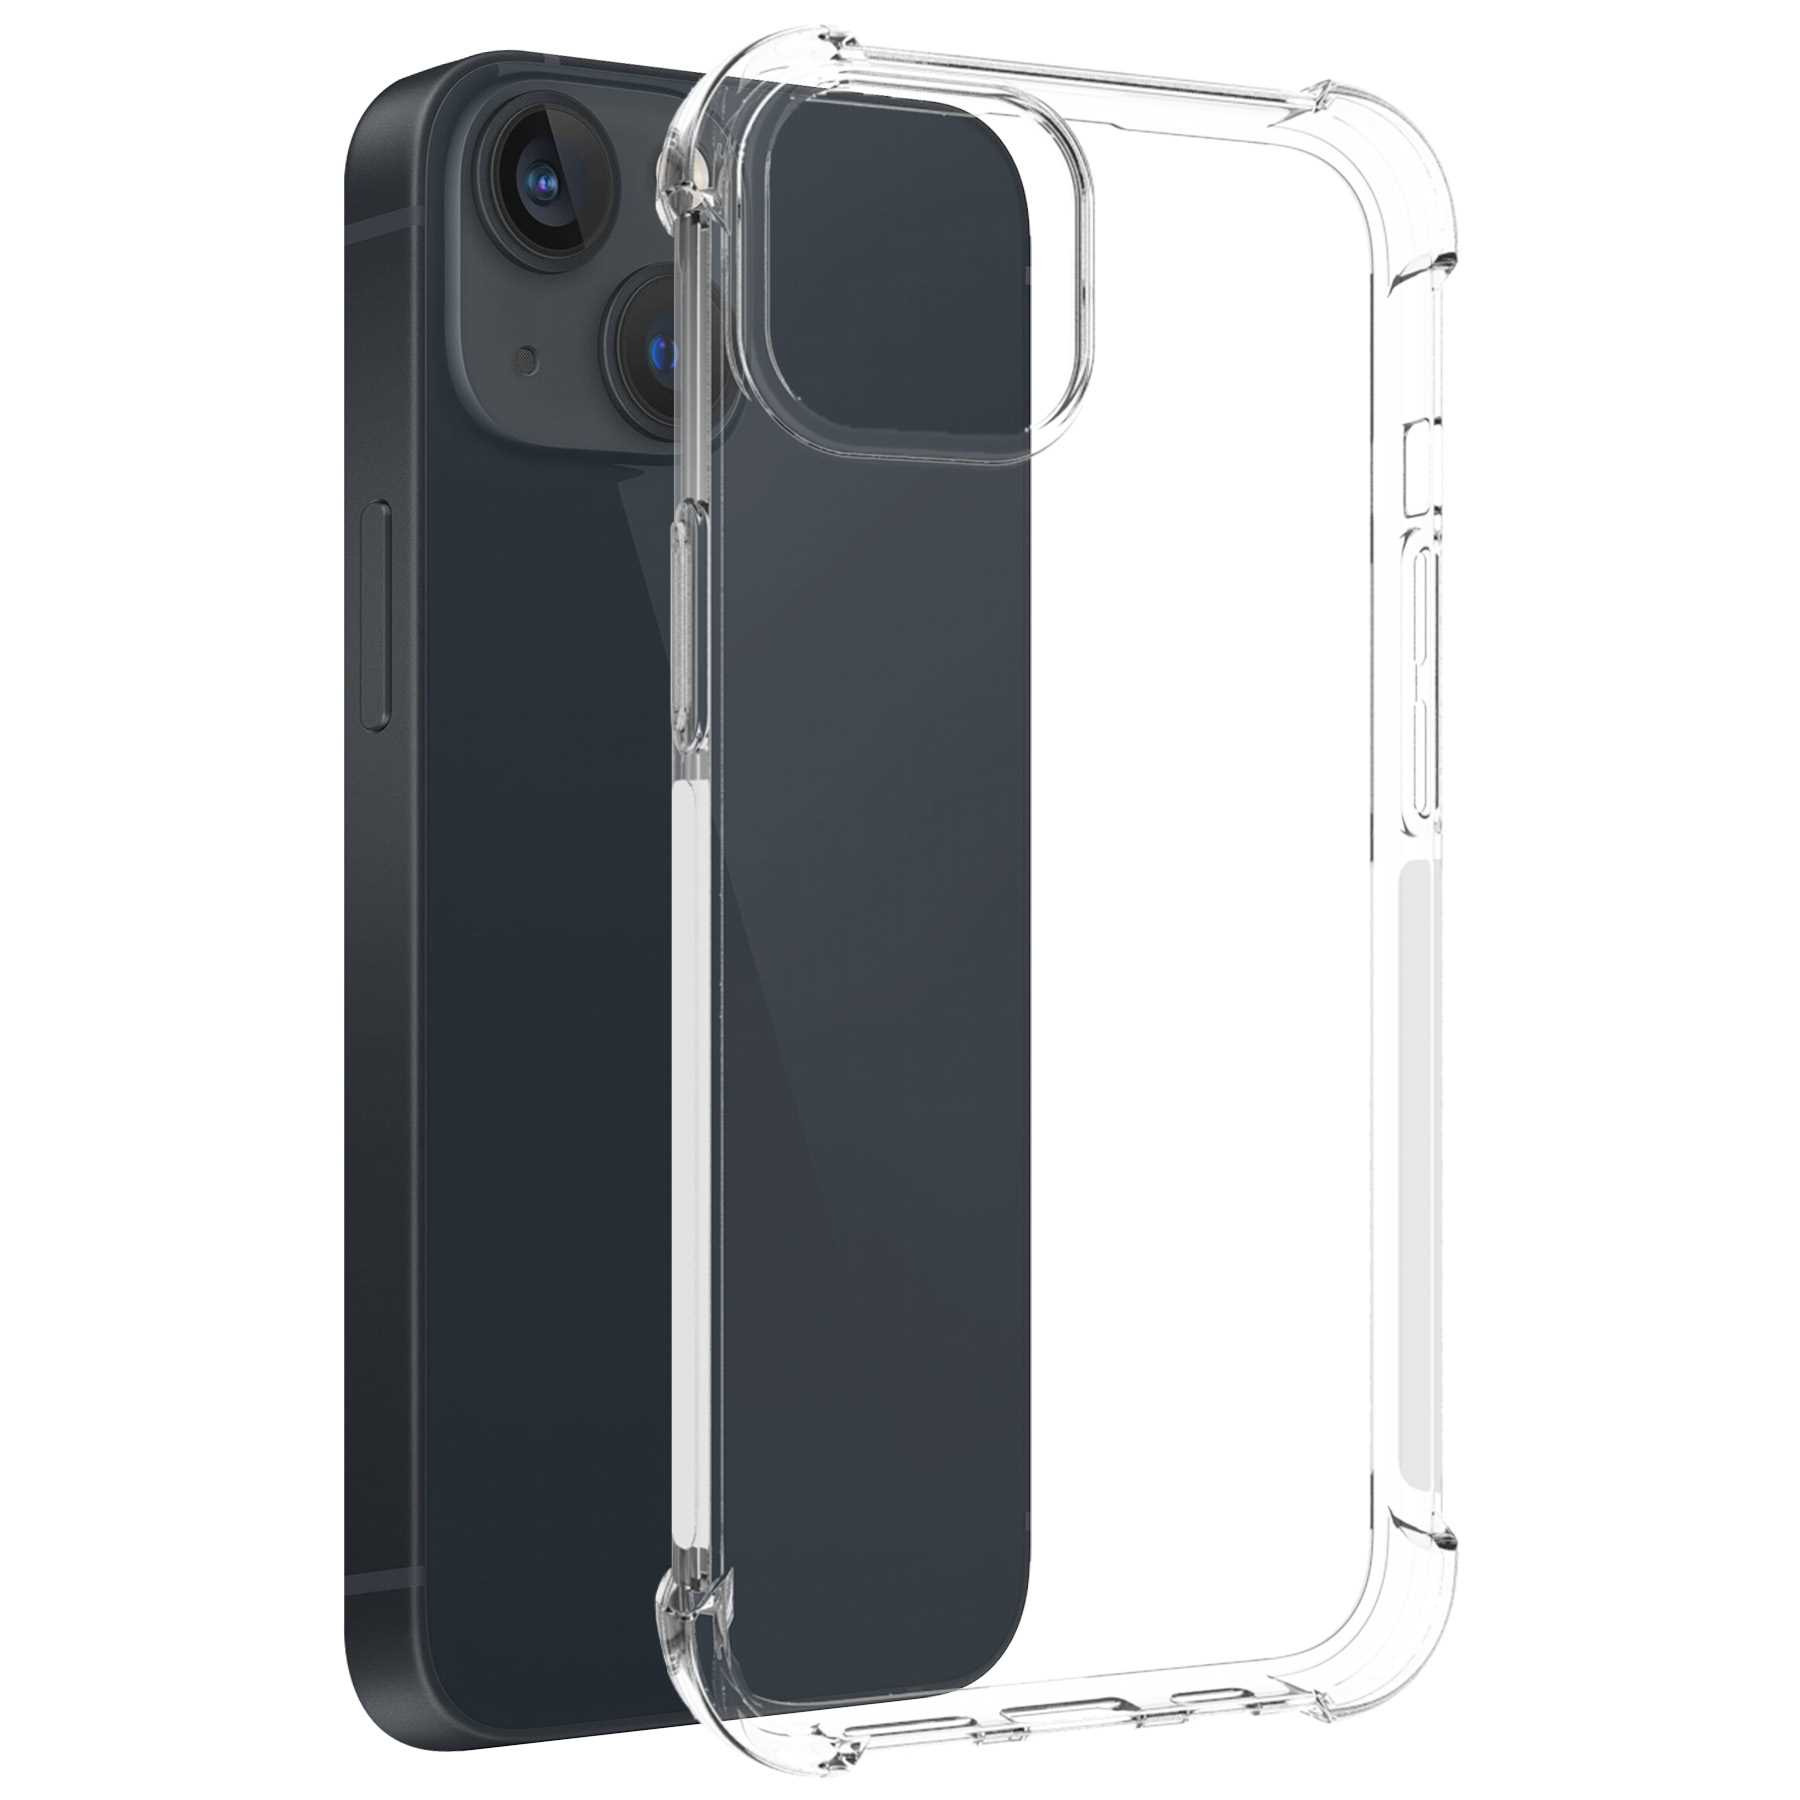 iPhone Backcover, Clear Transparent MTB Apple, MORE ENERGY Case, Armor 14,